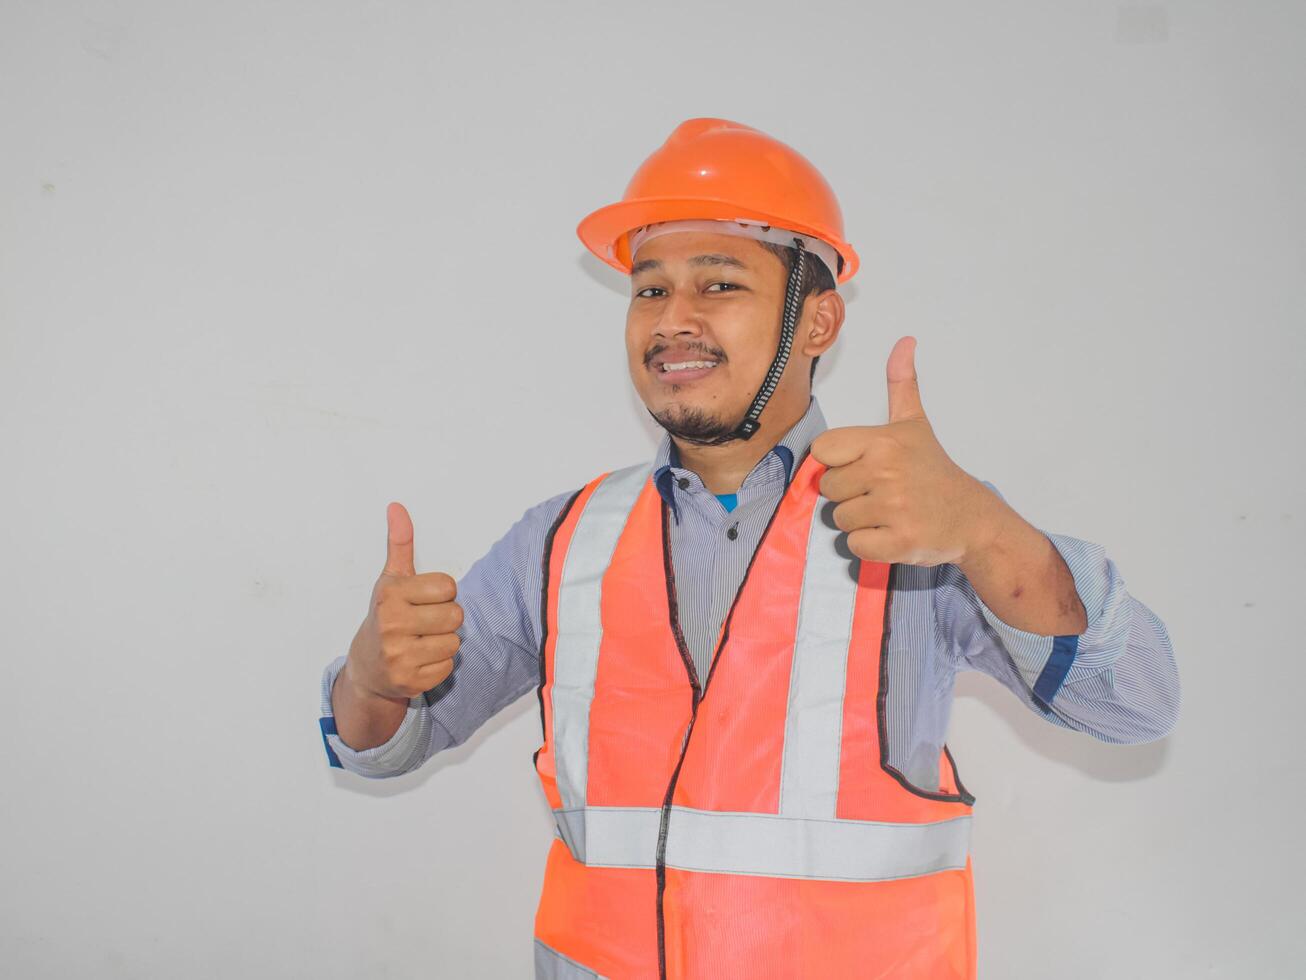 A man wearing construction hardhat smiling and give two thumbs up photo